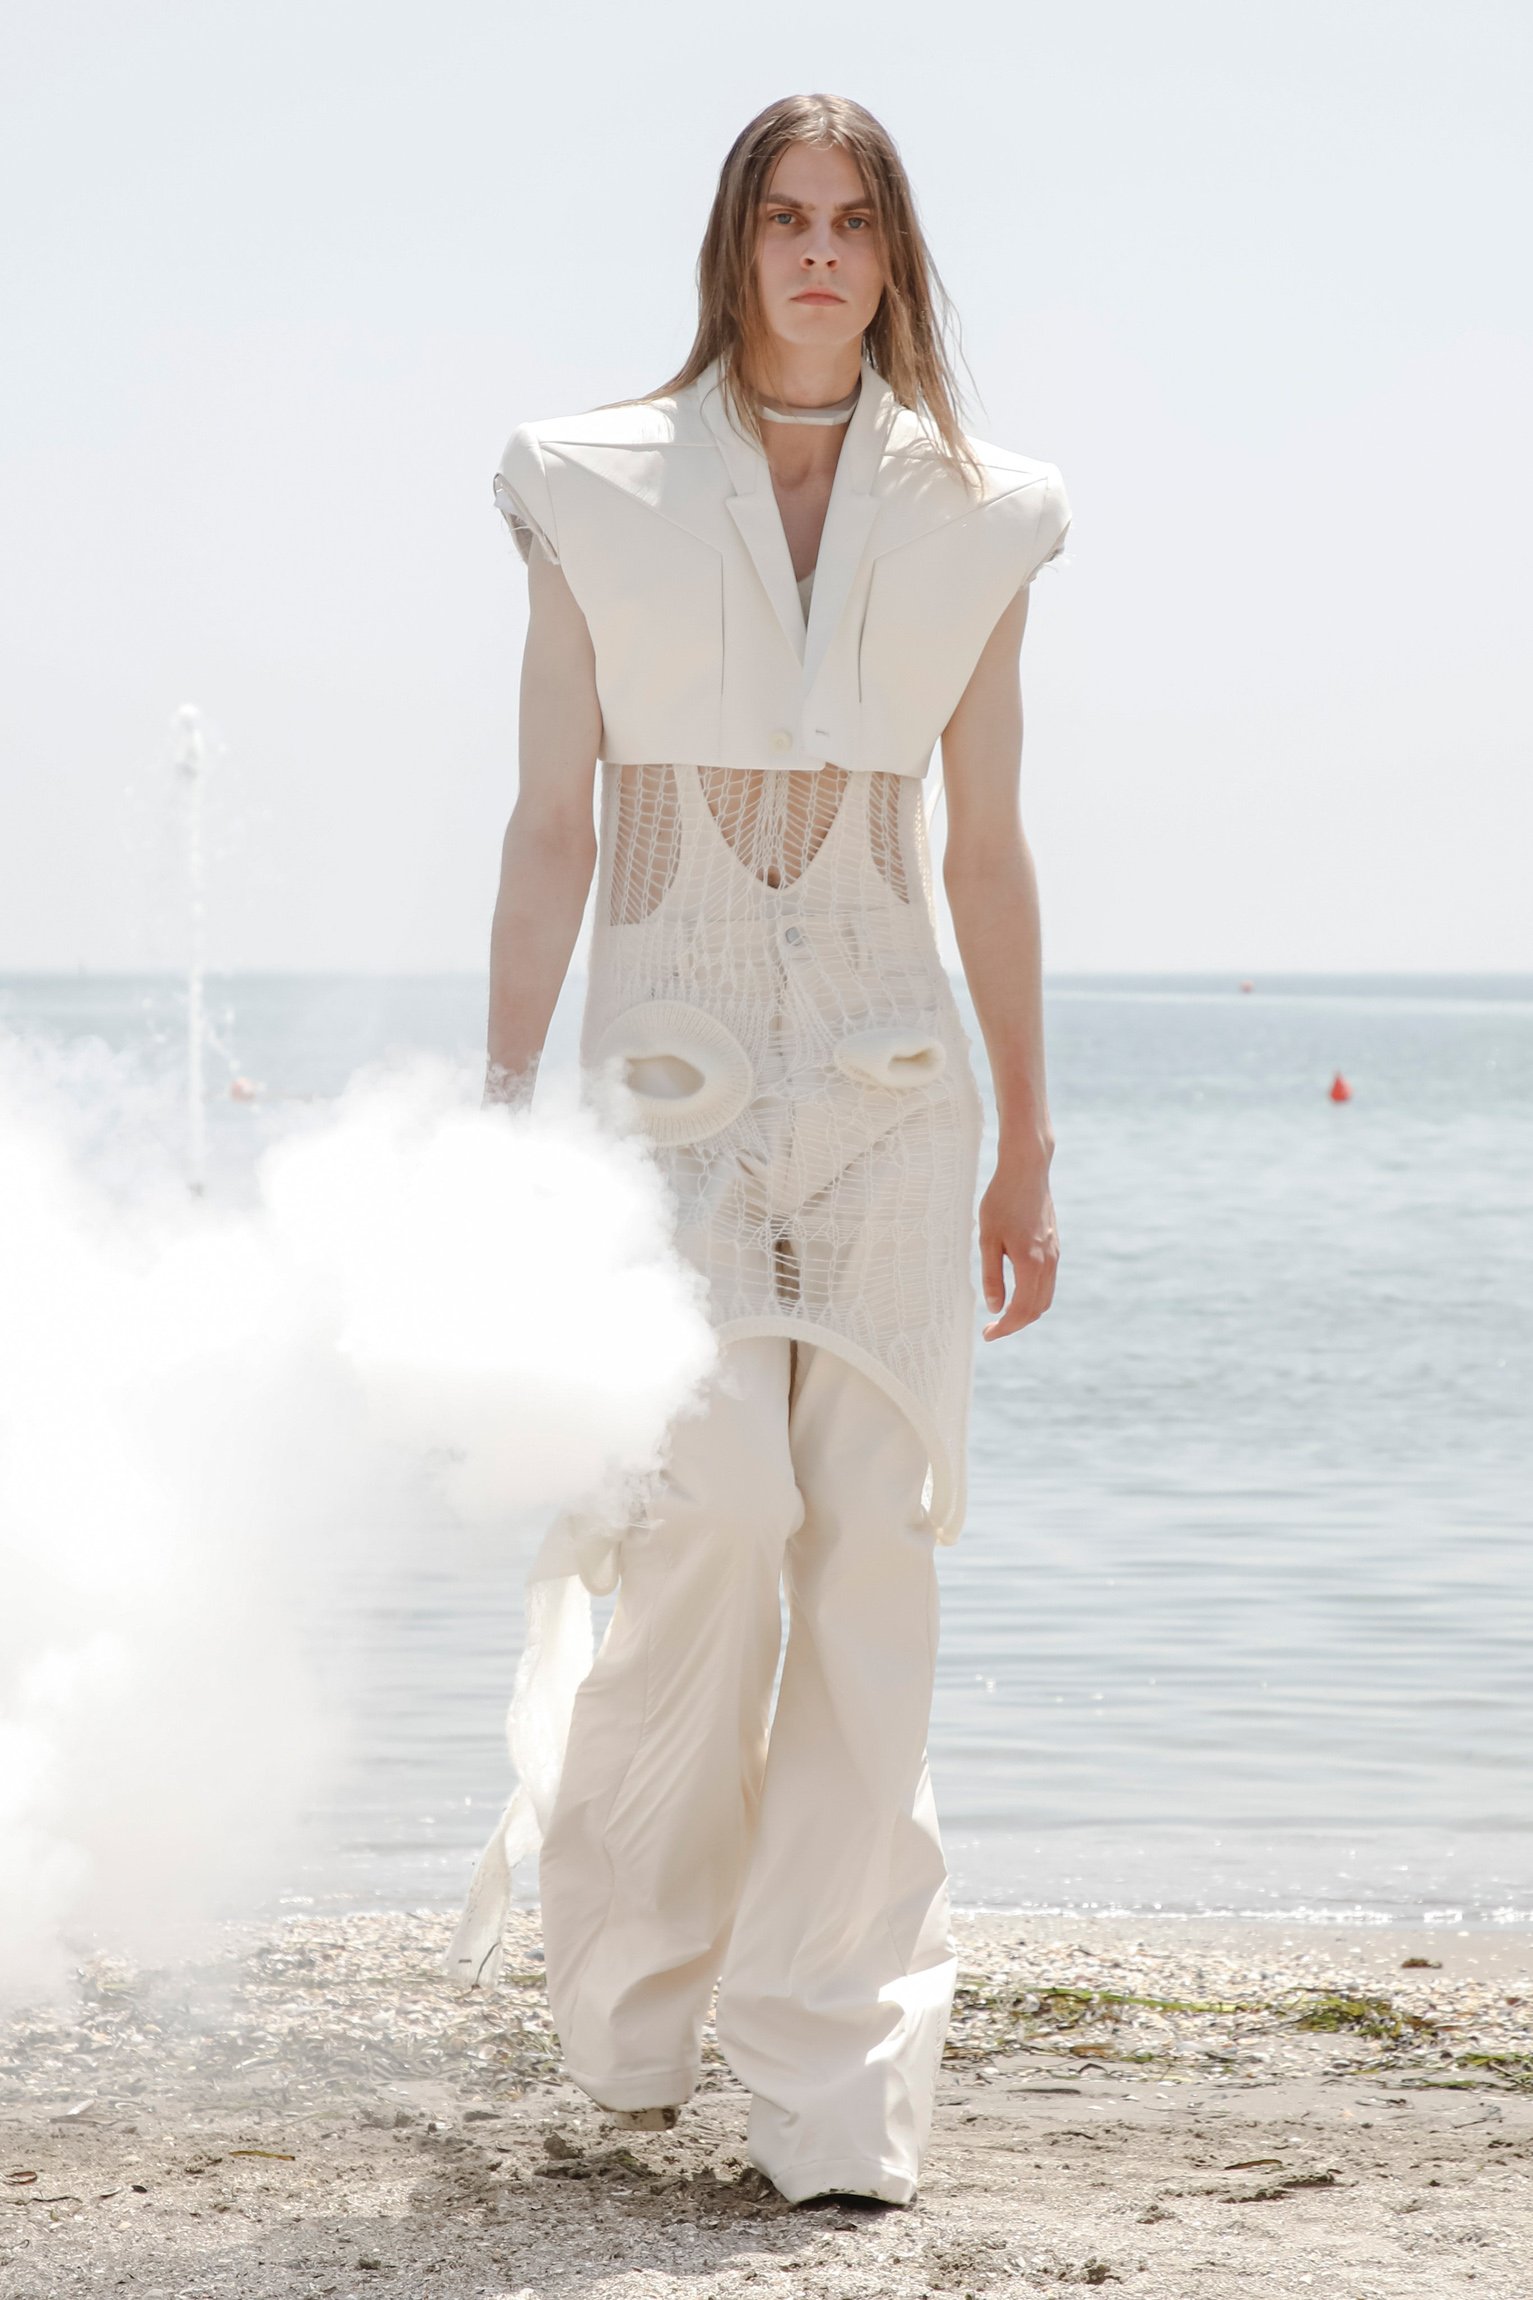 Justsmile Magazine - Rick Owens Lets the Fog Roll in for SS22